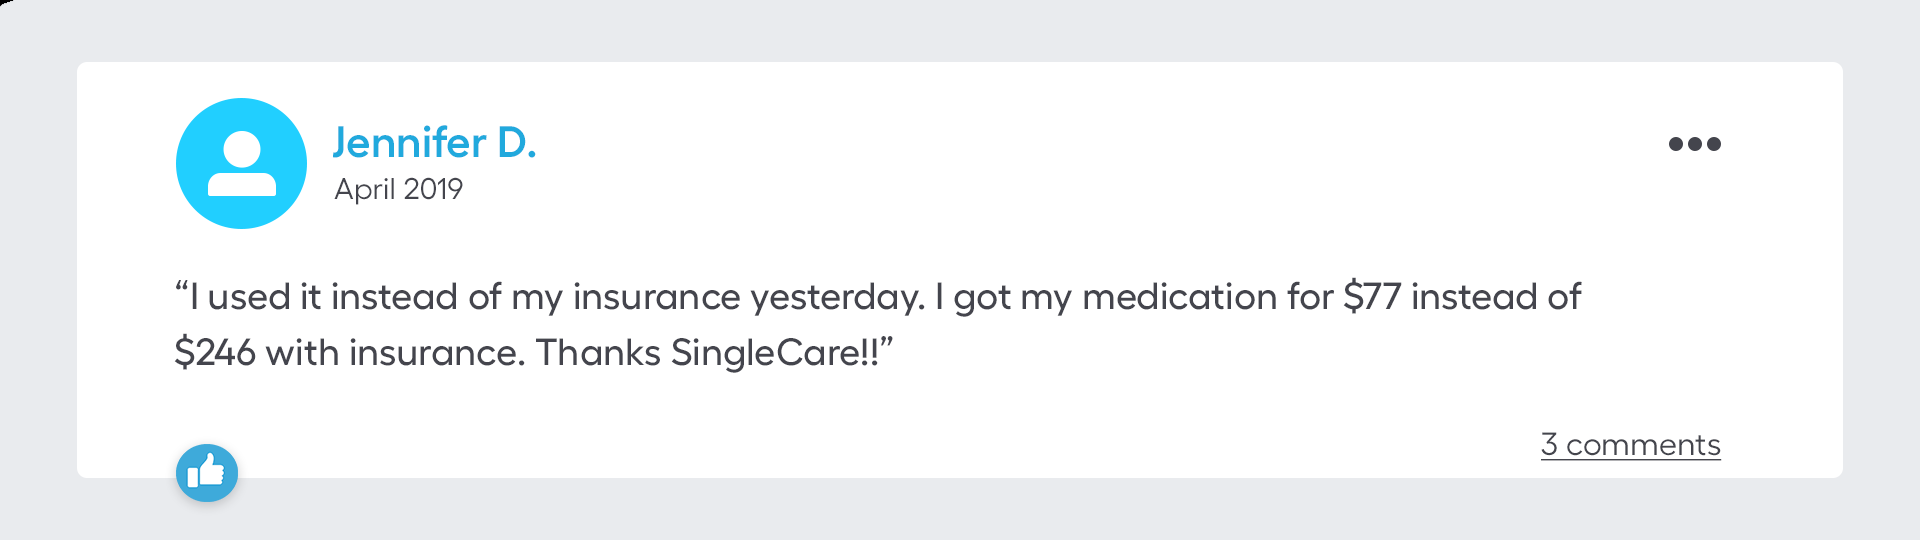 I used it instead of my insurance yesterday. I got my medication for $77 instead of $246 with insurance. Thanks SingleCare